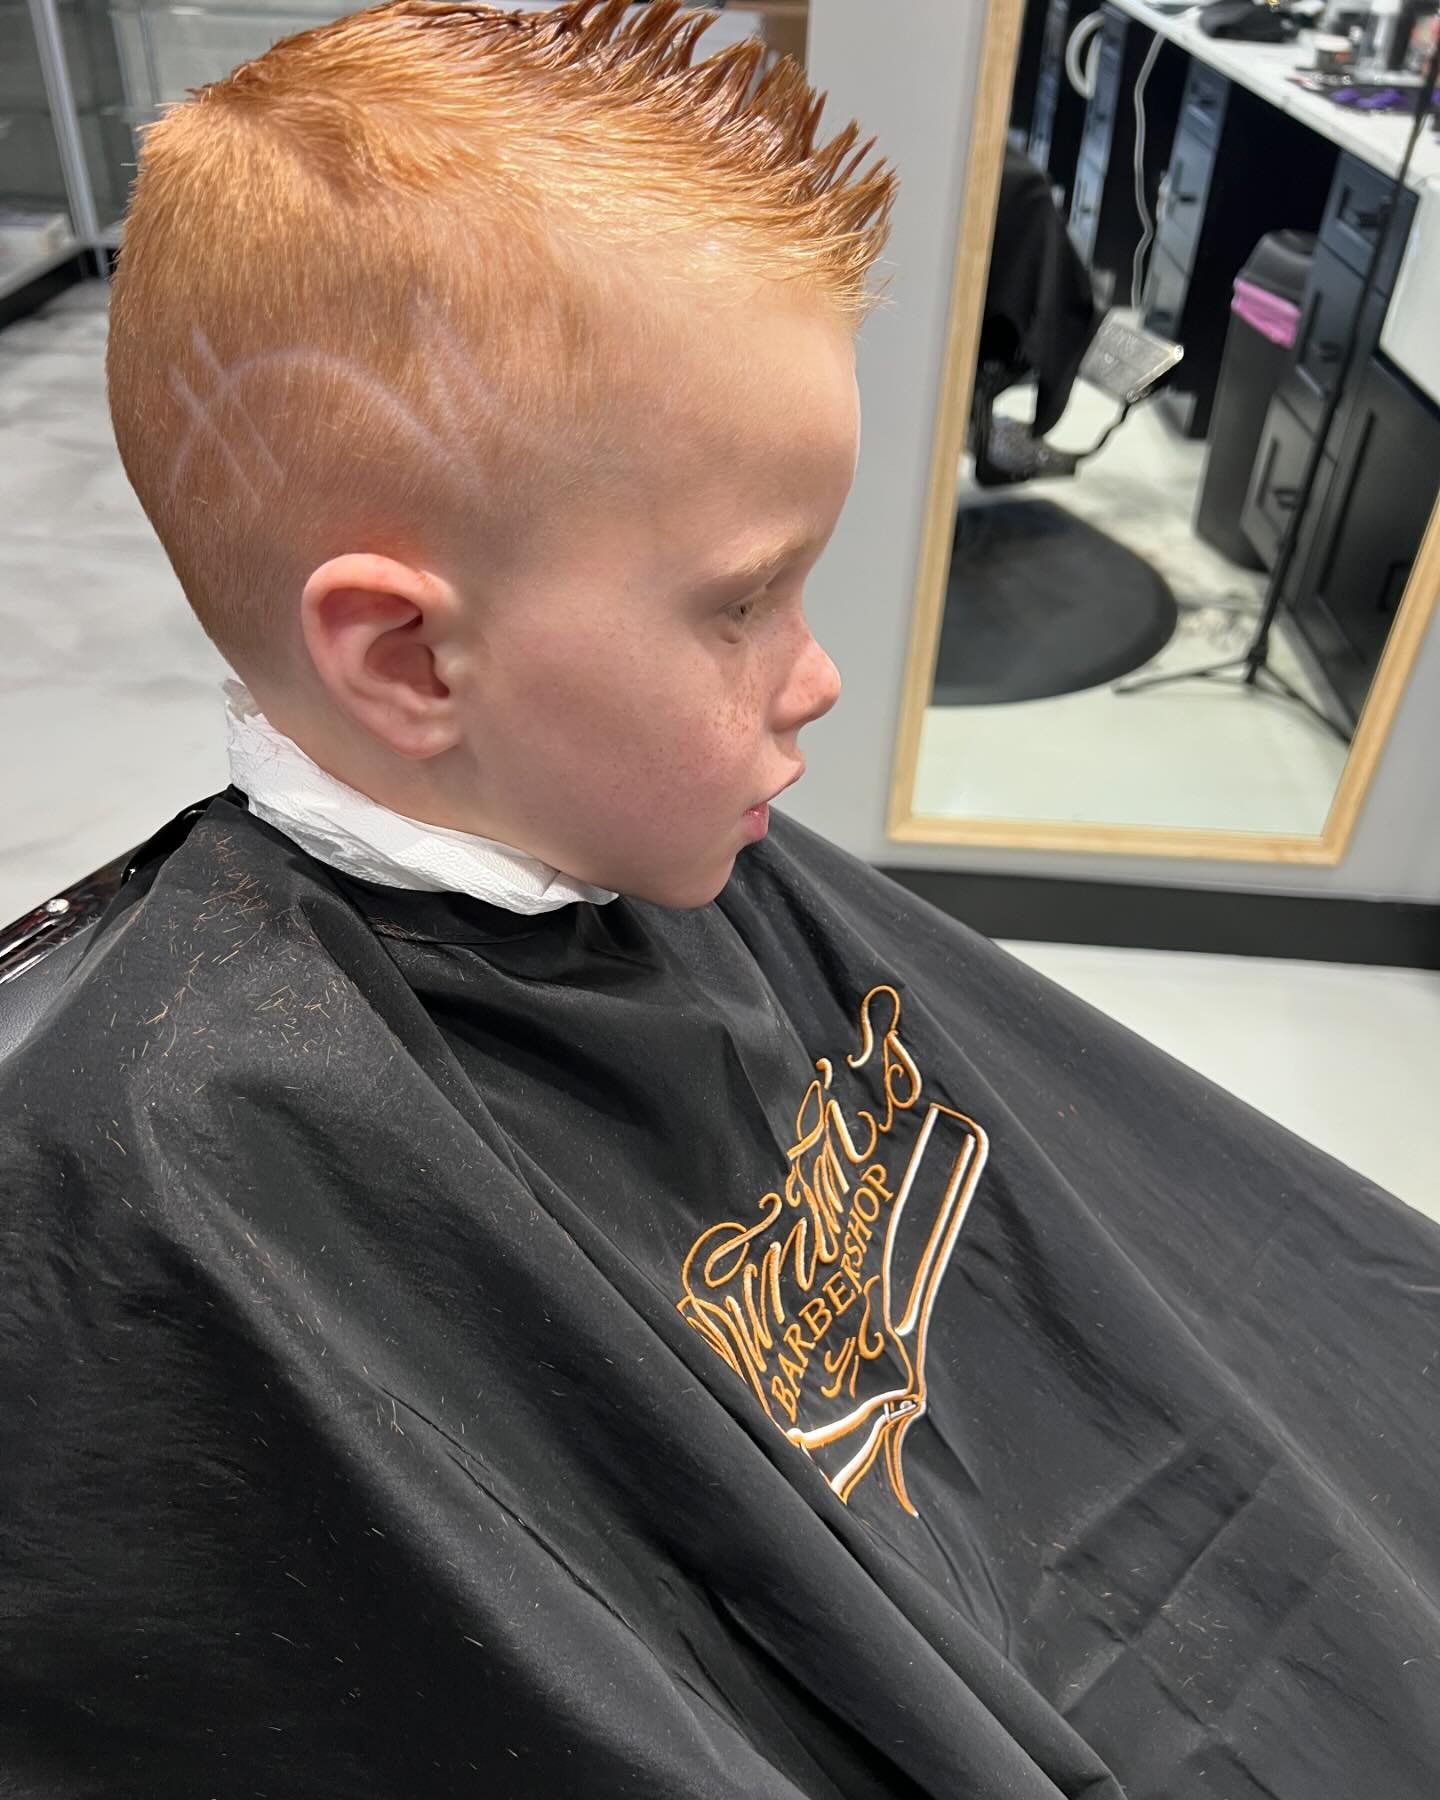 💈 Children&rsquo;s Haircuts 💈  Book your kids an appointment today for whatever sort of fresh cut and design that they are looking for! Shoutout to @jdthebarber508 on this  masterpiece 🤌🤌